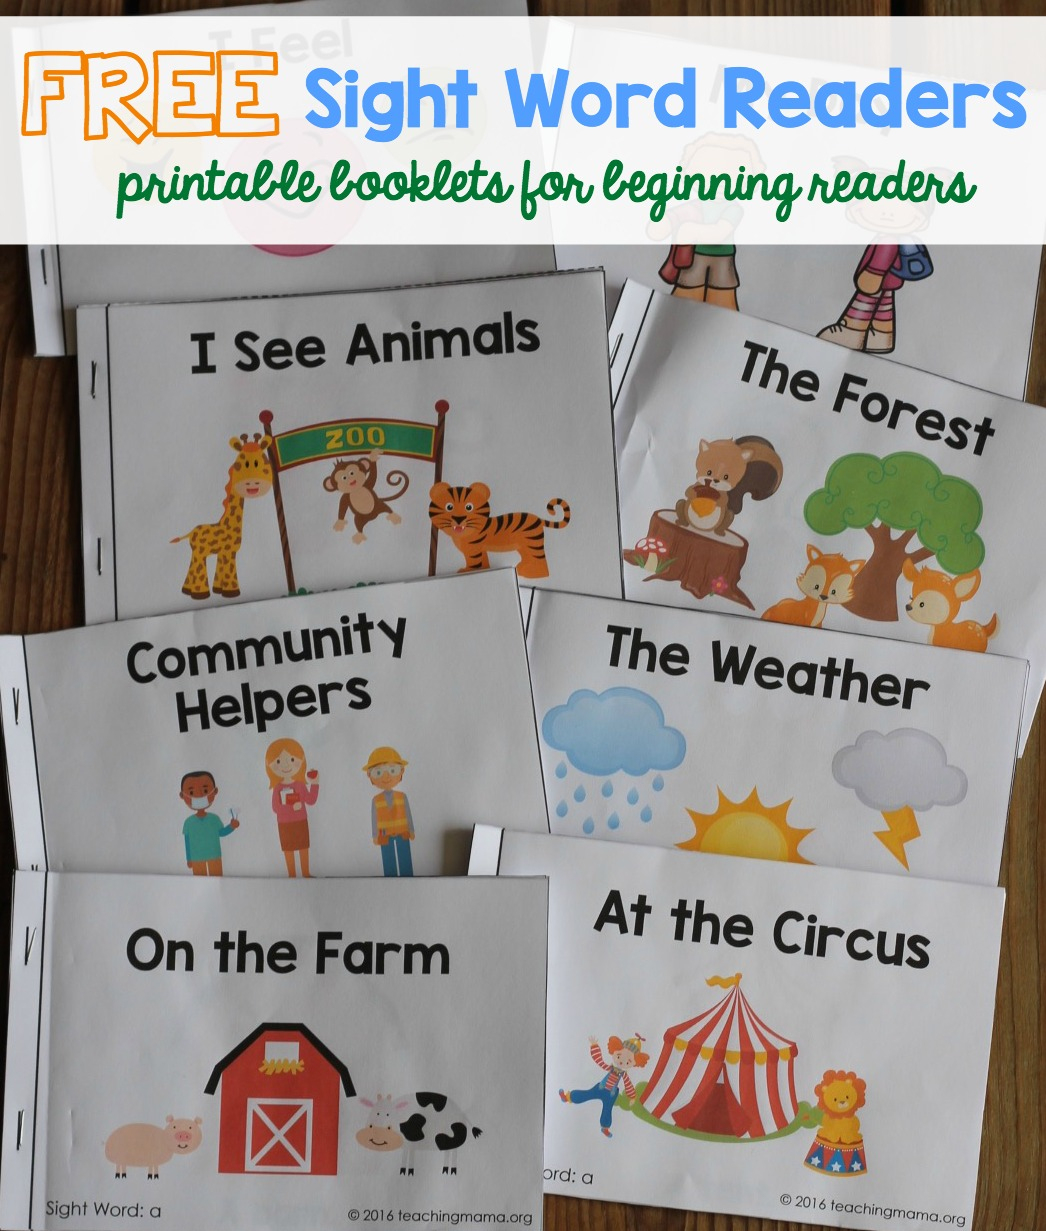 Sight Word Readers - Free Printable Books For Beginning Readers